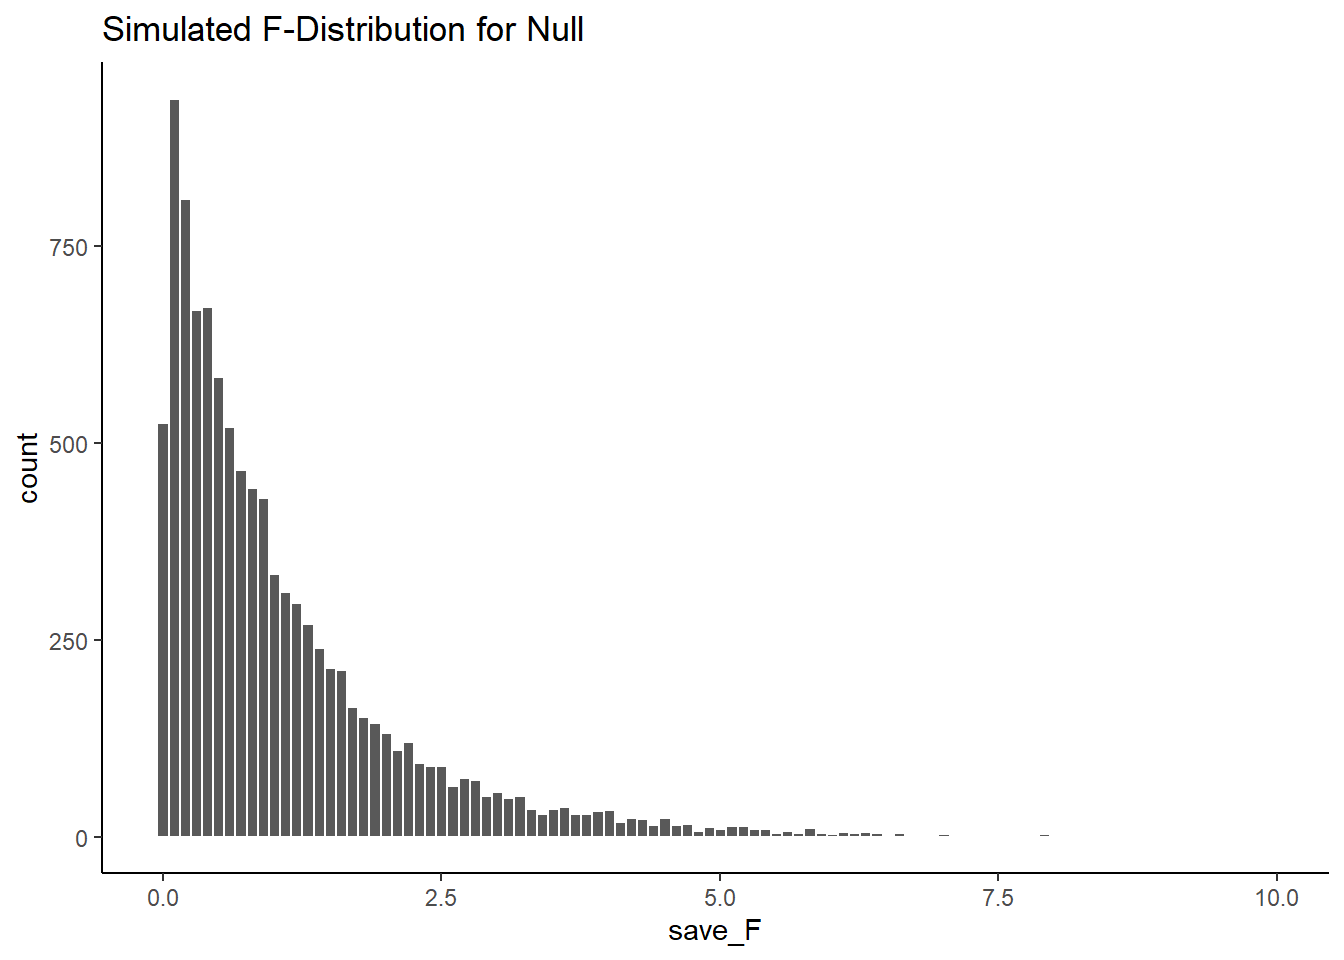 A simulation of 10,000 experiments from a null distribution where there is no differences. The histogram shows 10,000 $F$-values, one for each simulation. These are values that F can take in this situation. All of these $F$-values were produced by random sampling error